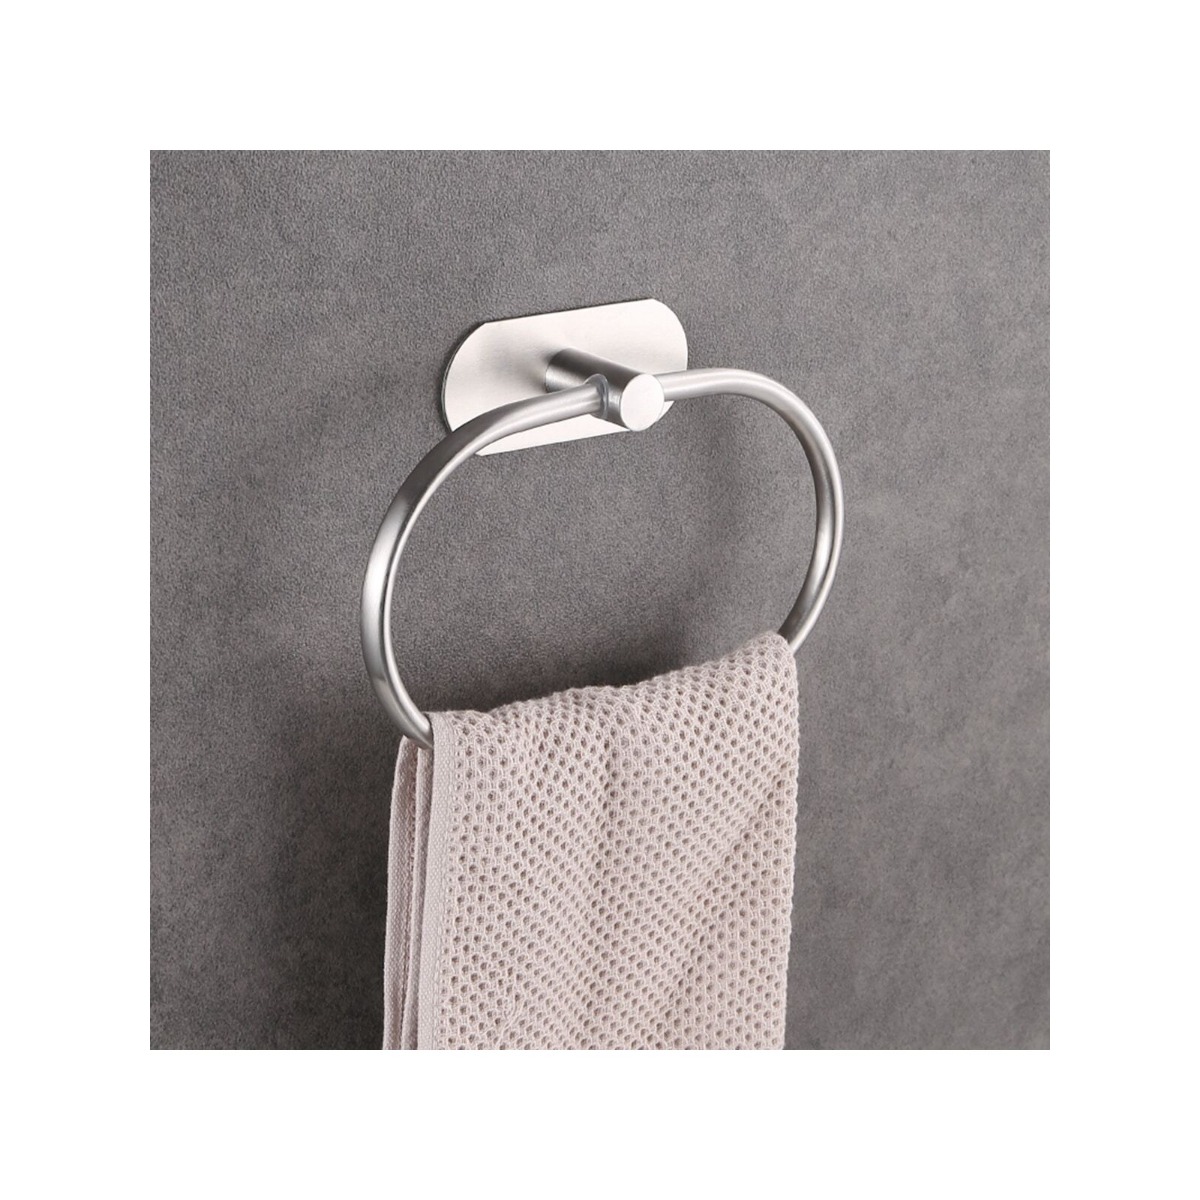 1pc Stainless Steel Oval Towel Holder, Black Color Without Drilling, Direct  Sticking, Suitable For Hanging Towels, Handkerchiefs, Belts, Etc. In Kitchen,  Bathroom. Can Be Used As A Gift